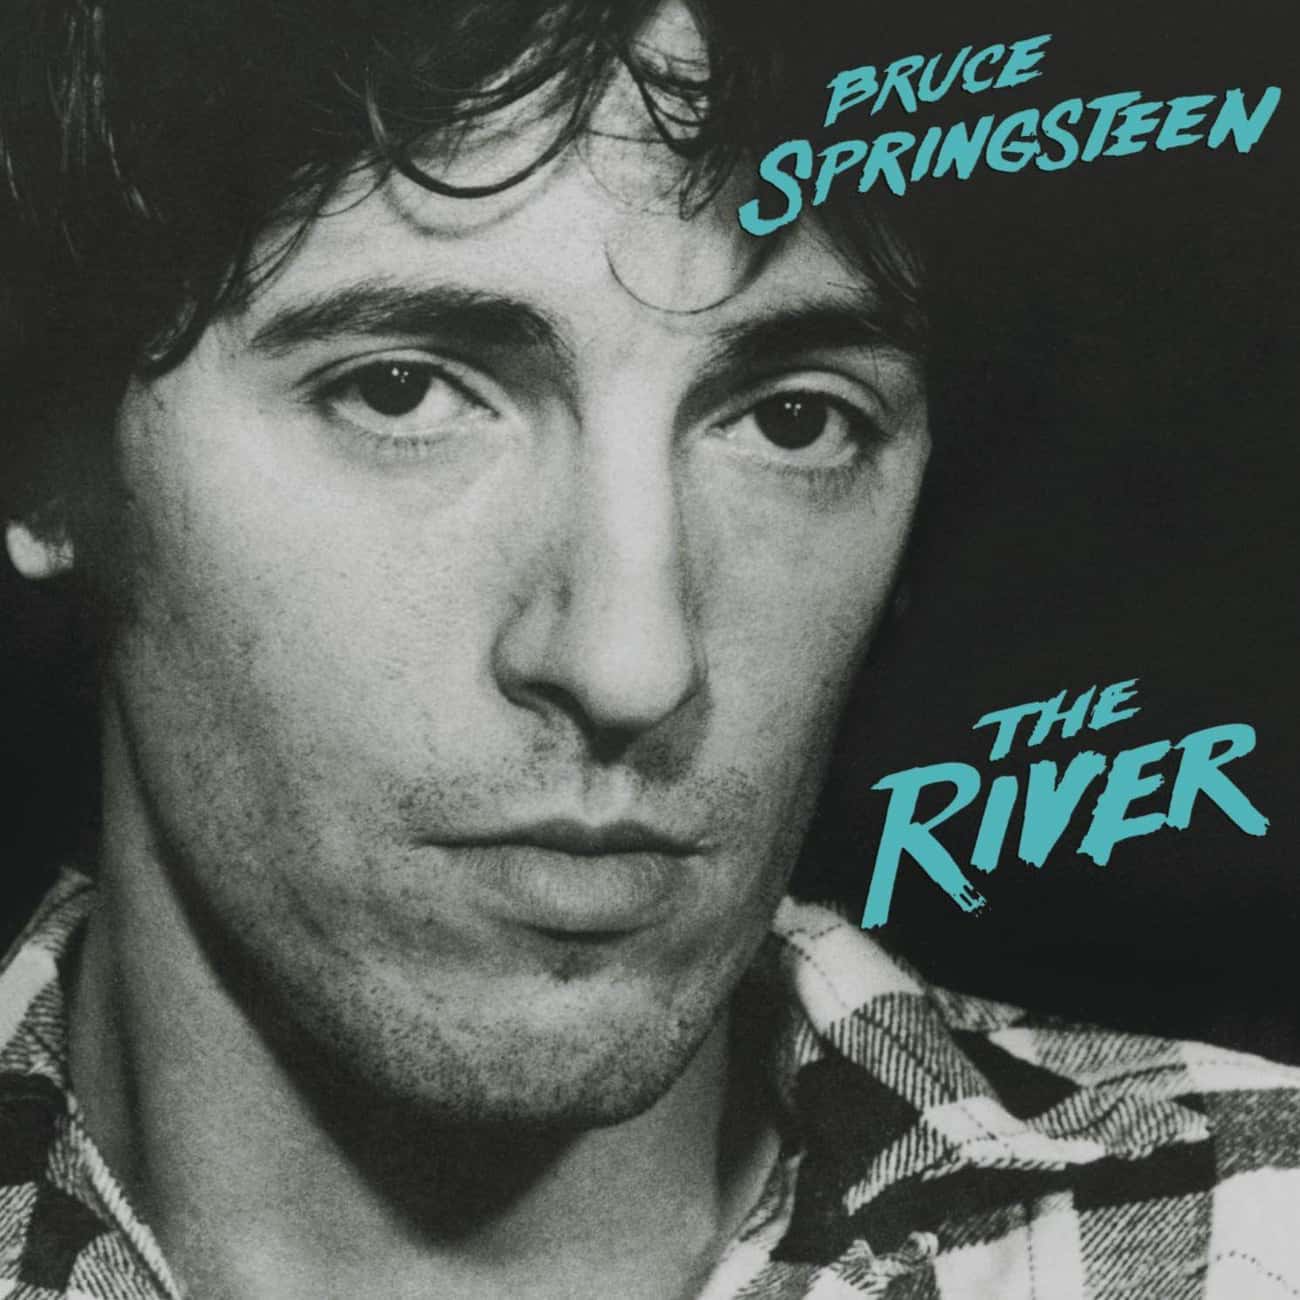 Bruce Springsteen - 'The River'